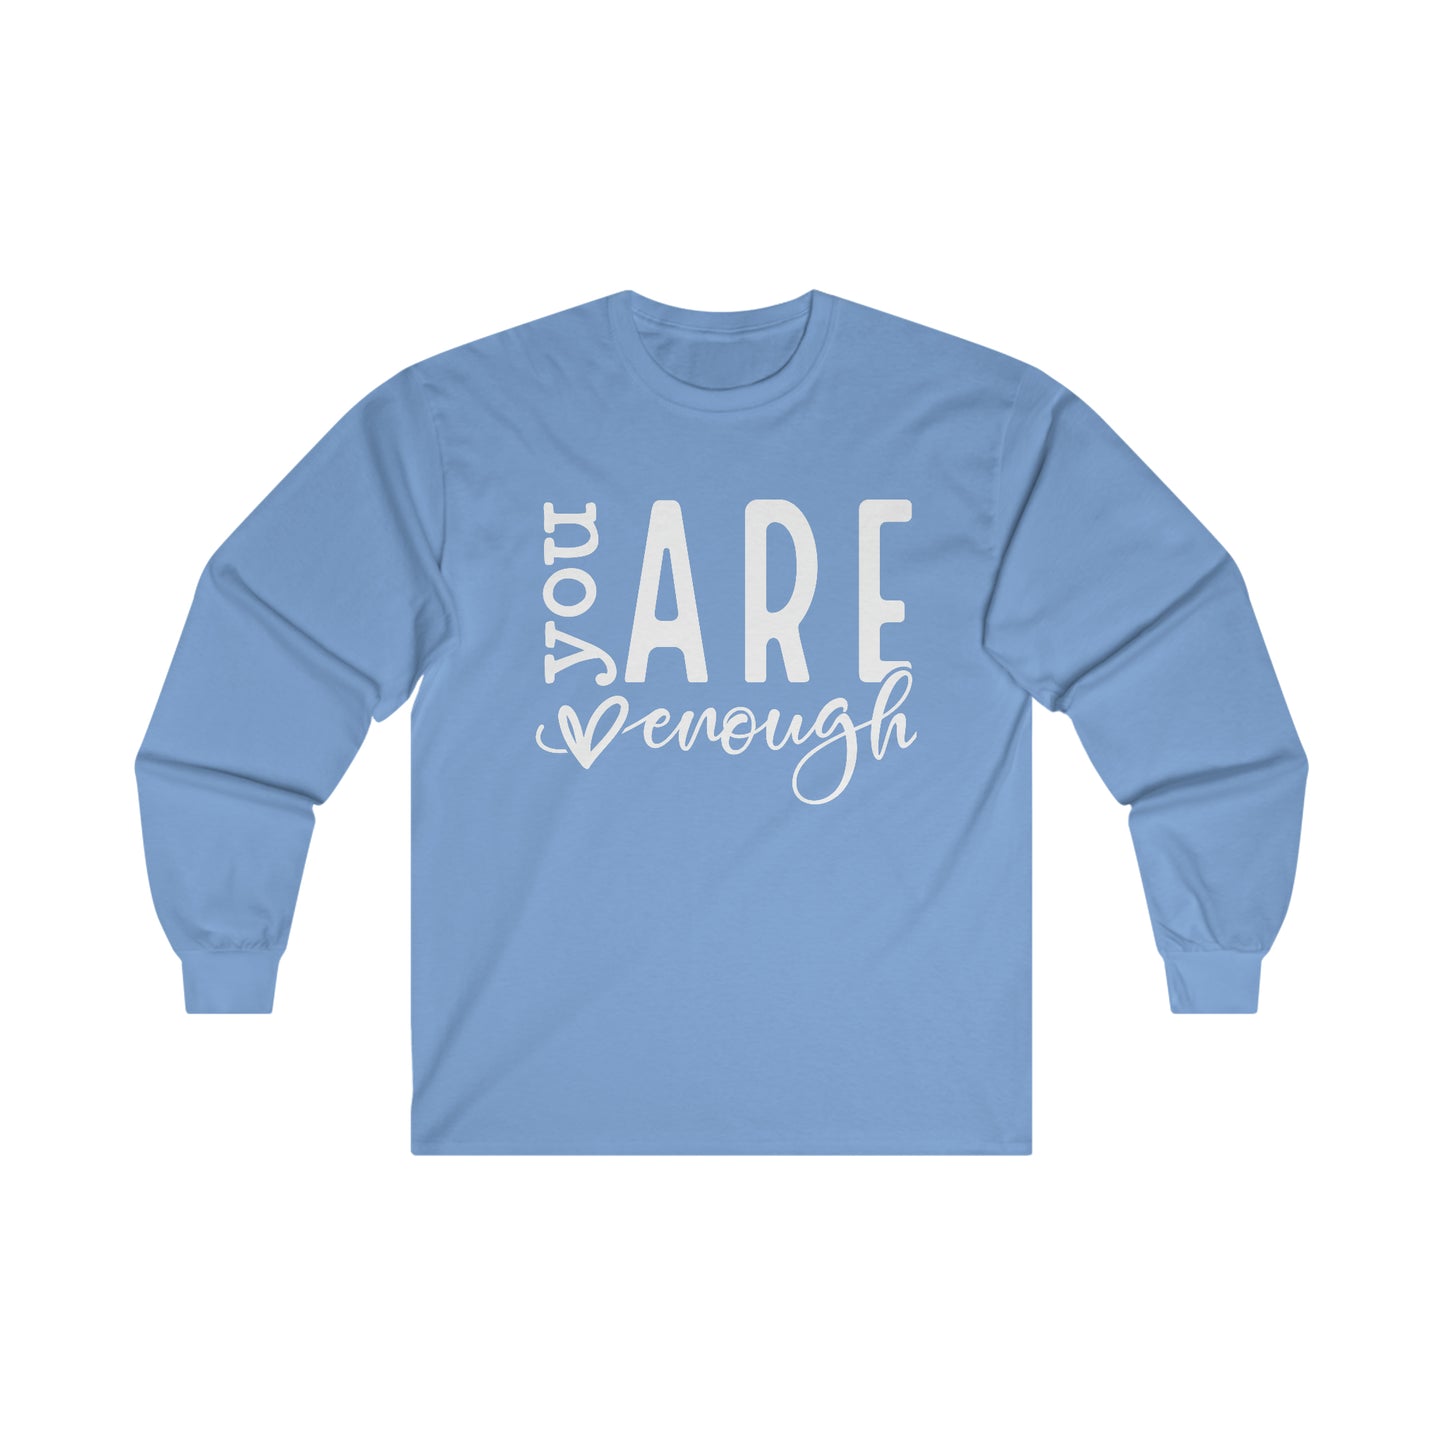 You Are Enough Long Sleeve Shirt